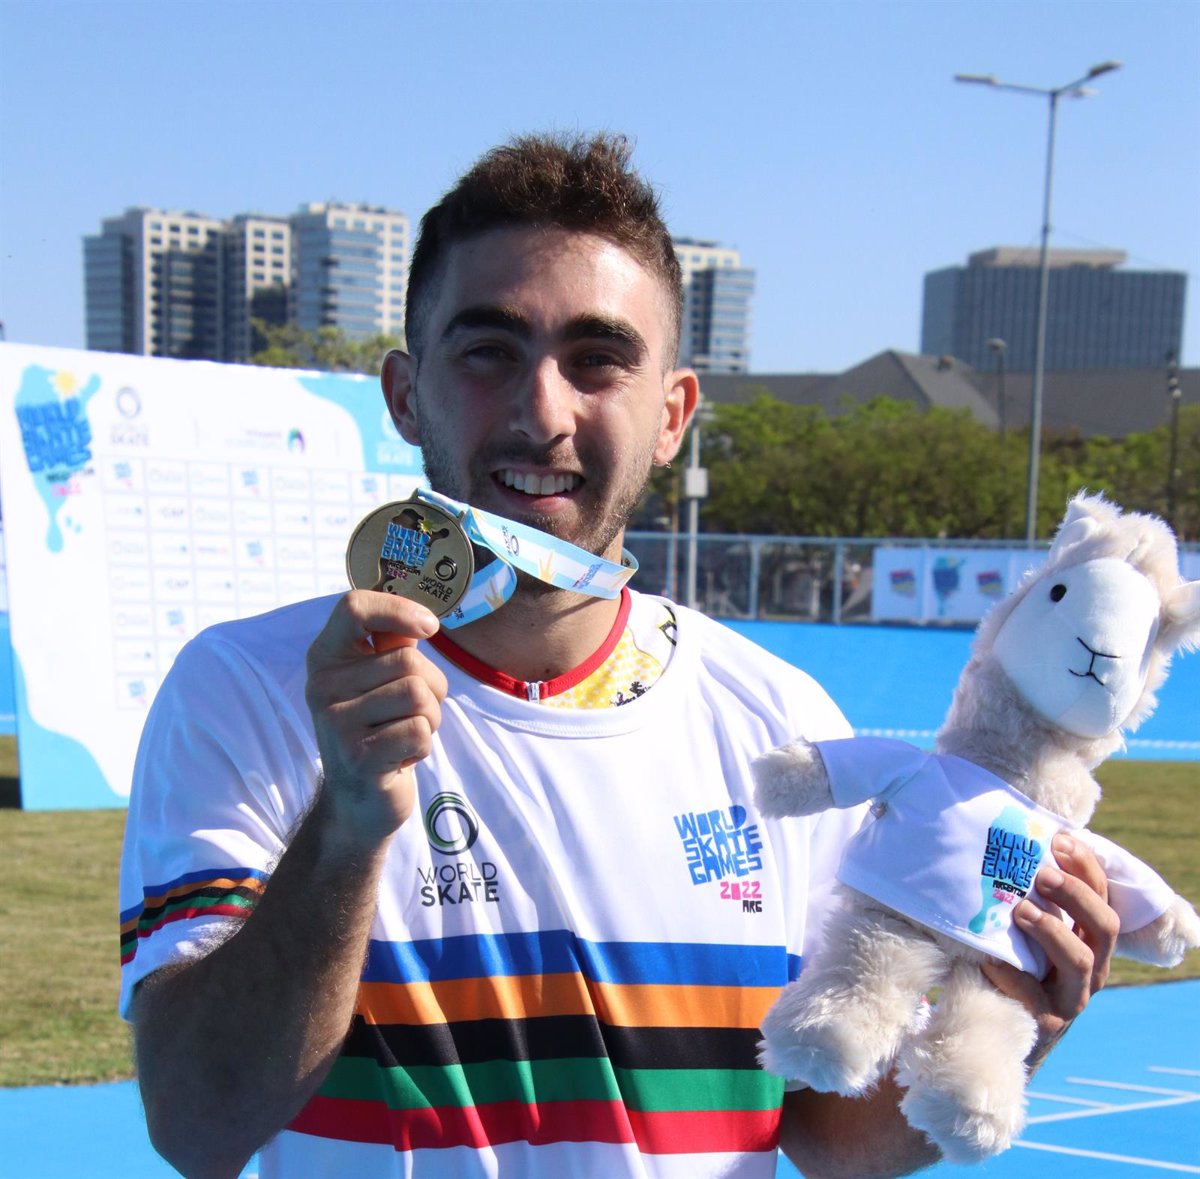 Chevi Guzmán wins the first gold for Spain at the World Skate Games in Argentina